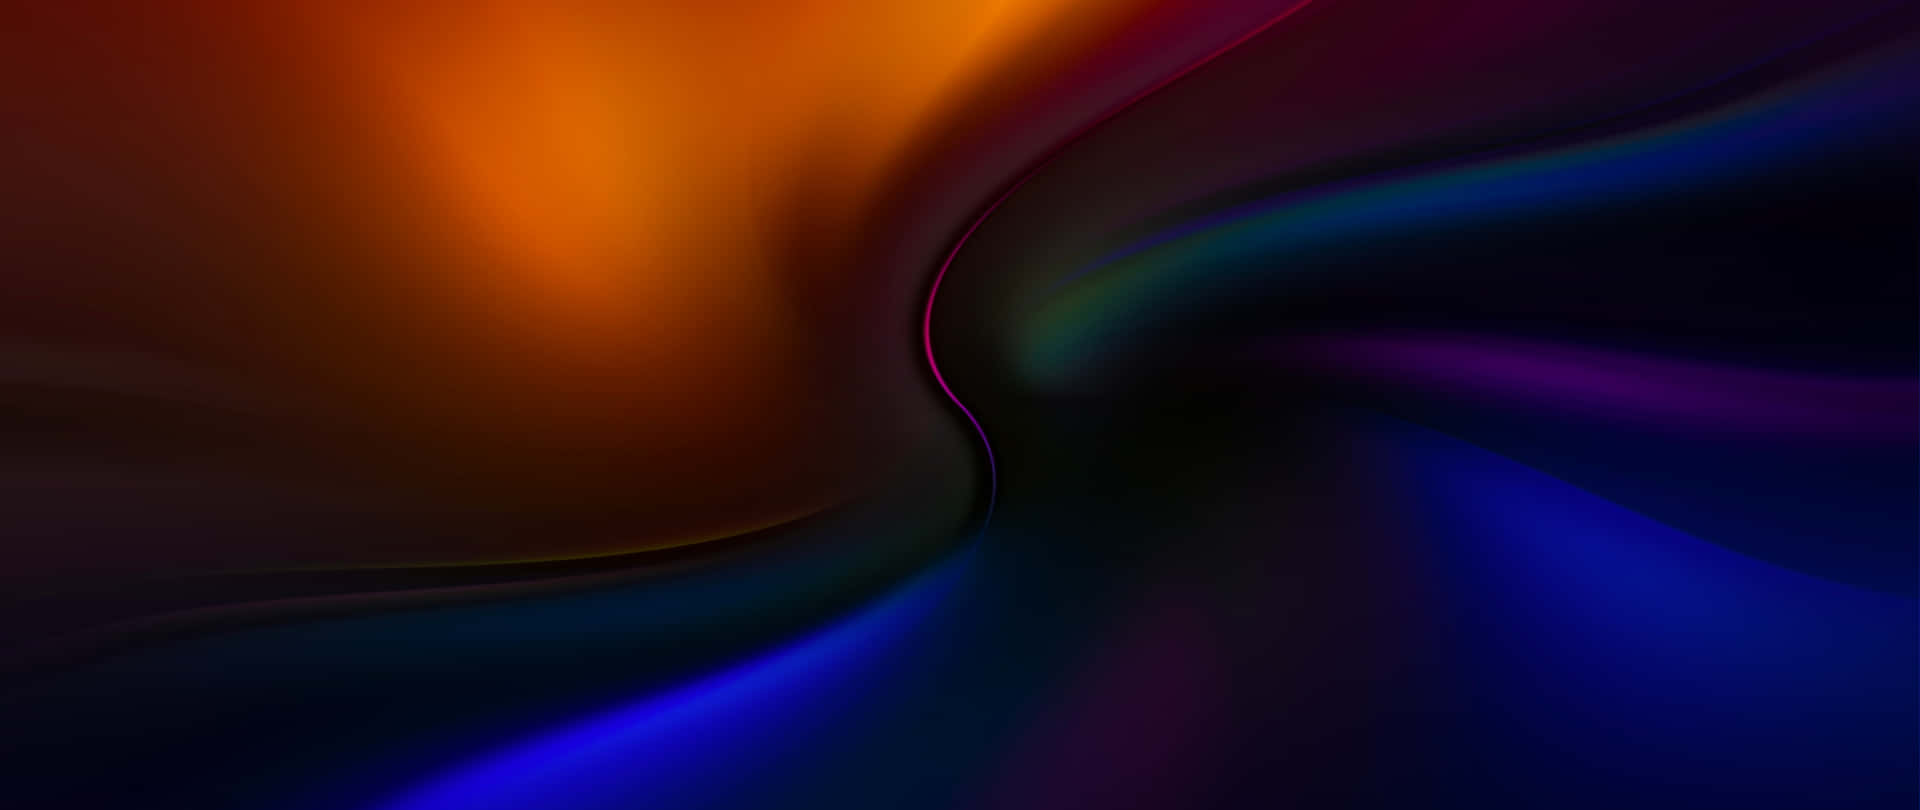 "Feel the vibrancy of Super Amoled displays with the latest technology!" Wallpaper